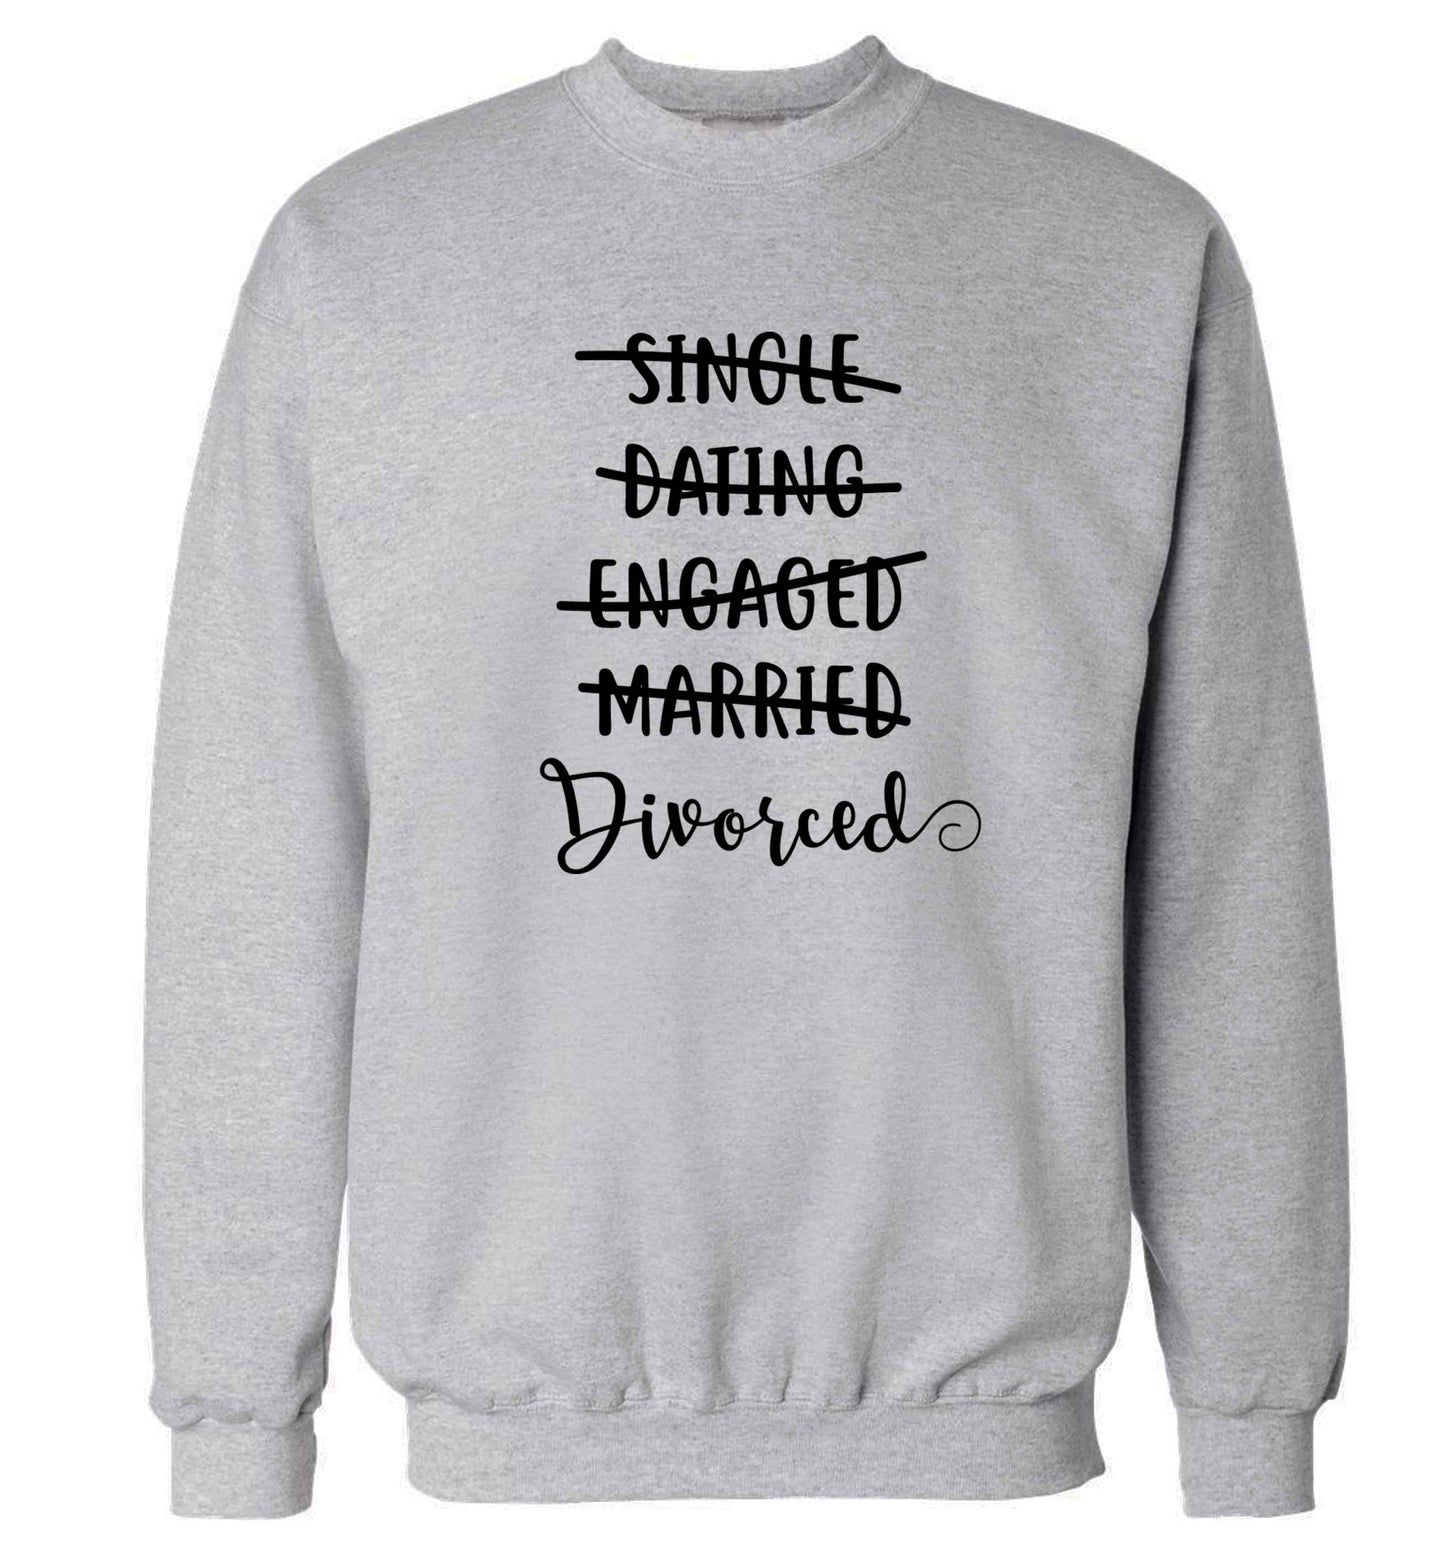 Single, dating, engaged, divorced Adult's unisex grey Sweater 2XL